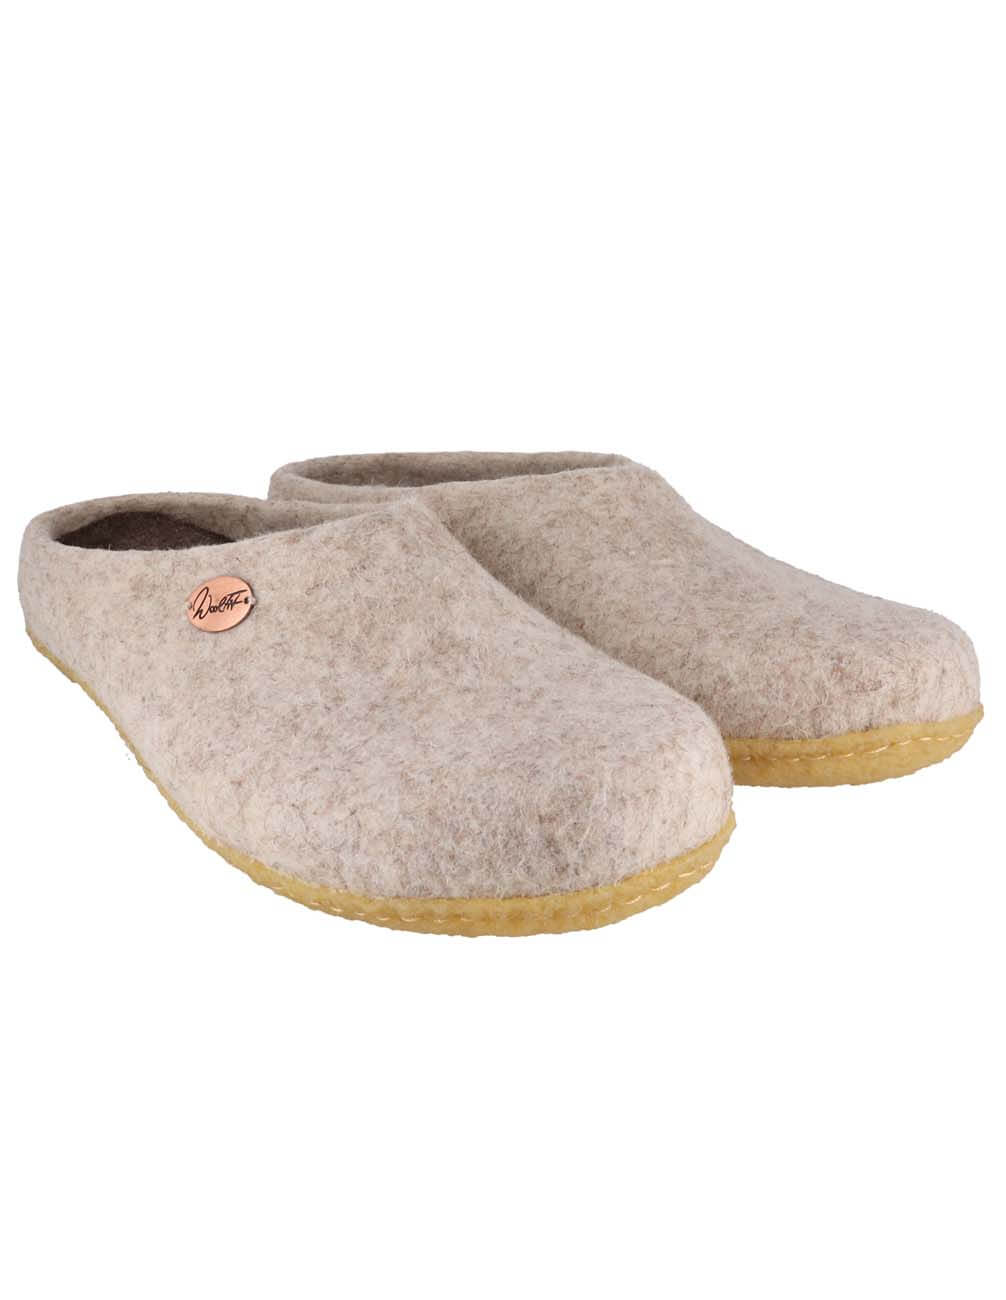 WoolFit® 'Classic' handfelted Slippers with Natural Rubber Sole, beige ...